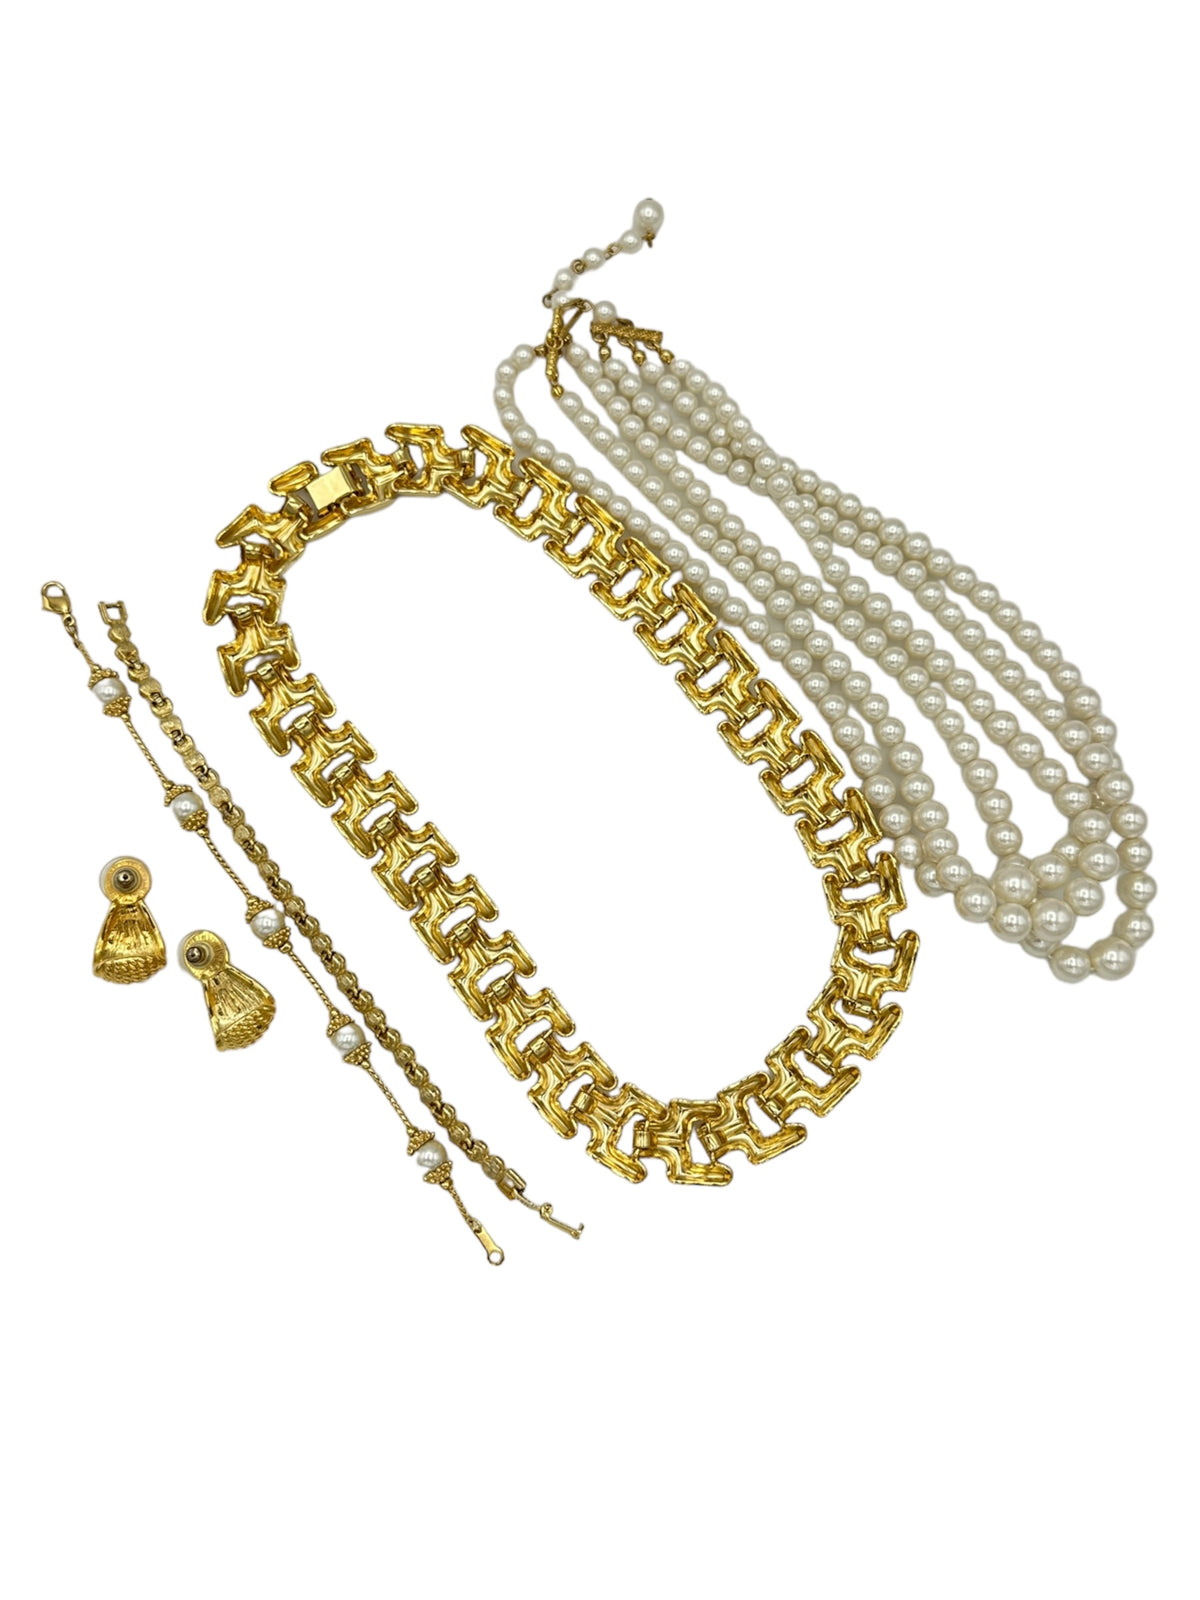 Vintage Pearls & Gold Chain Vintage Jewelry Curated Collection